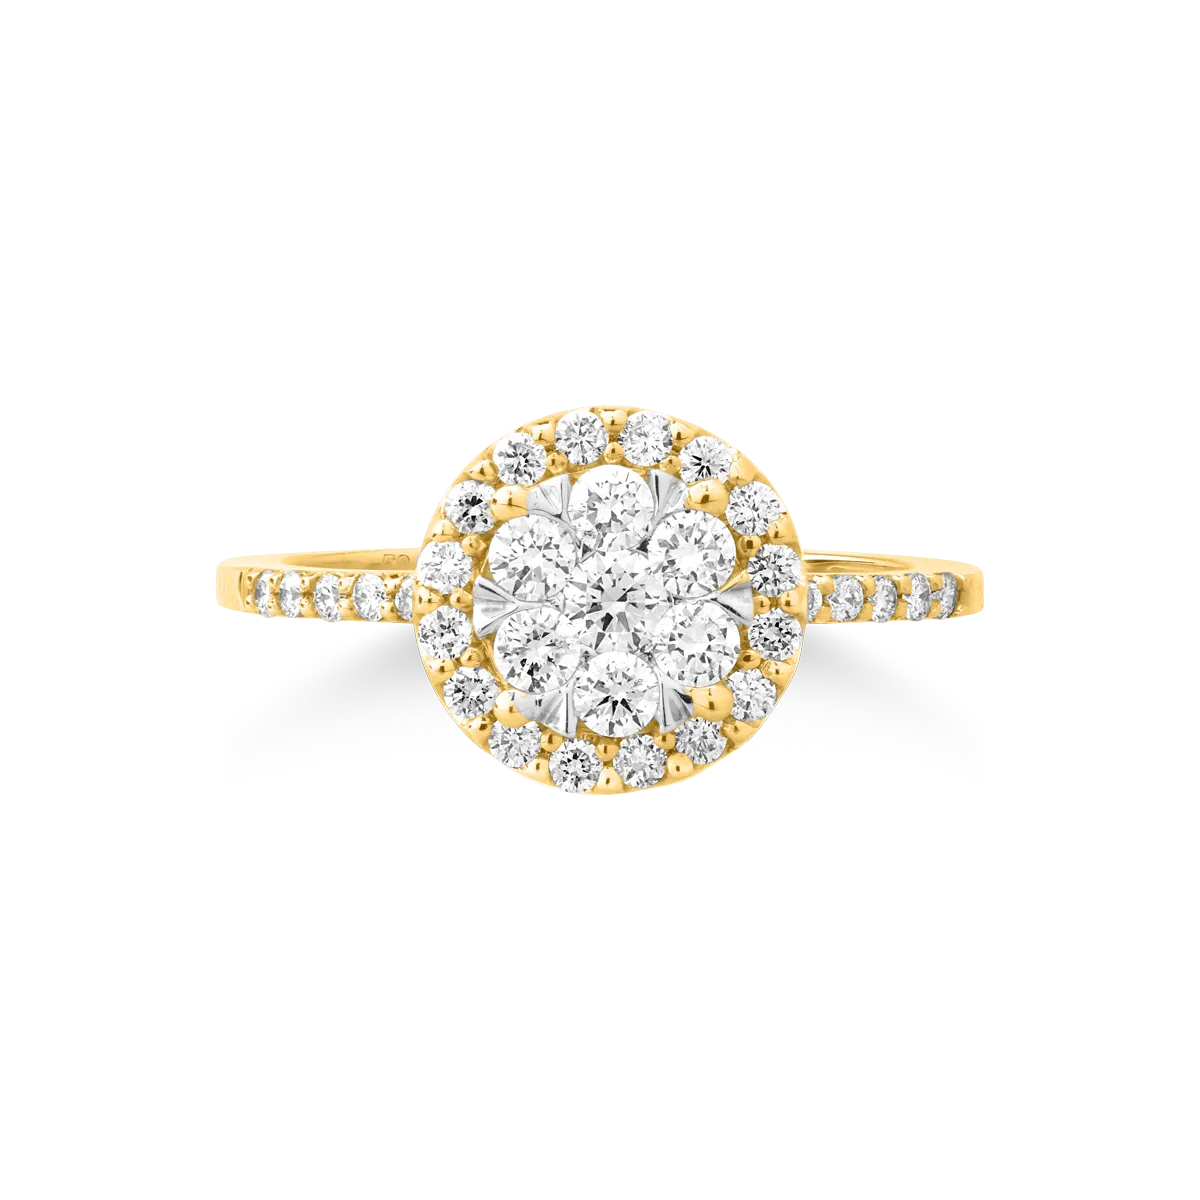 14K yellow gold ring with 0.5ct diamonds